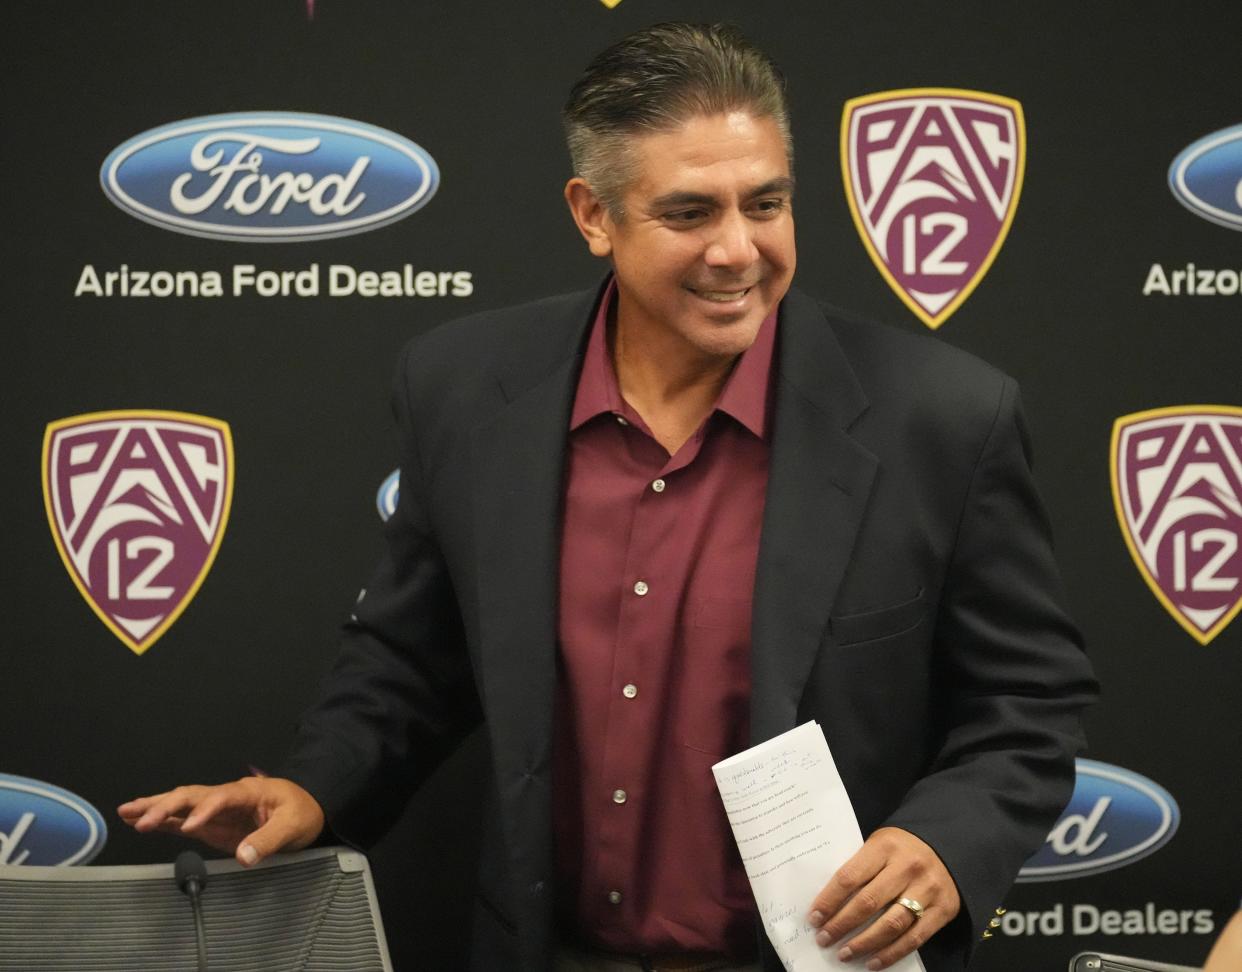 ASU interim head football coach Shaun Aguano smiles after an introductory news conference on Sept. 19, 2022. Aguano replaced Herm Edwards as head coach, who mutually agreed to part ways with the university.